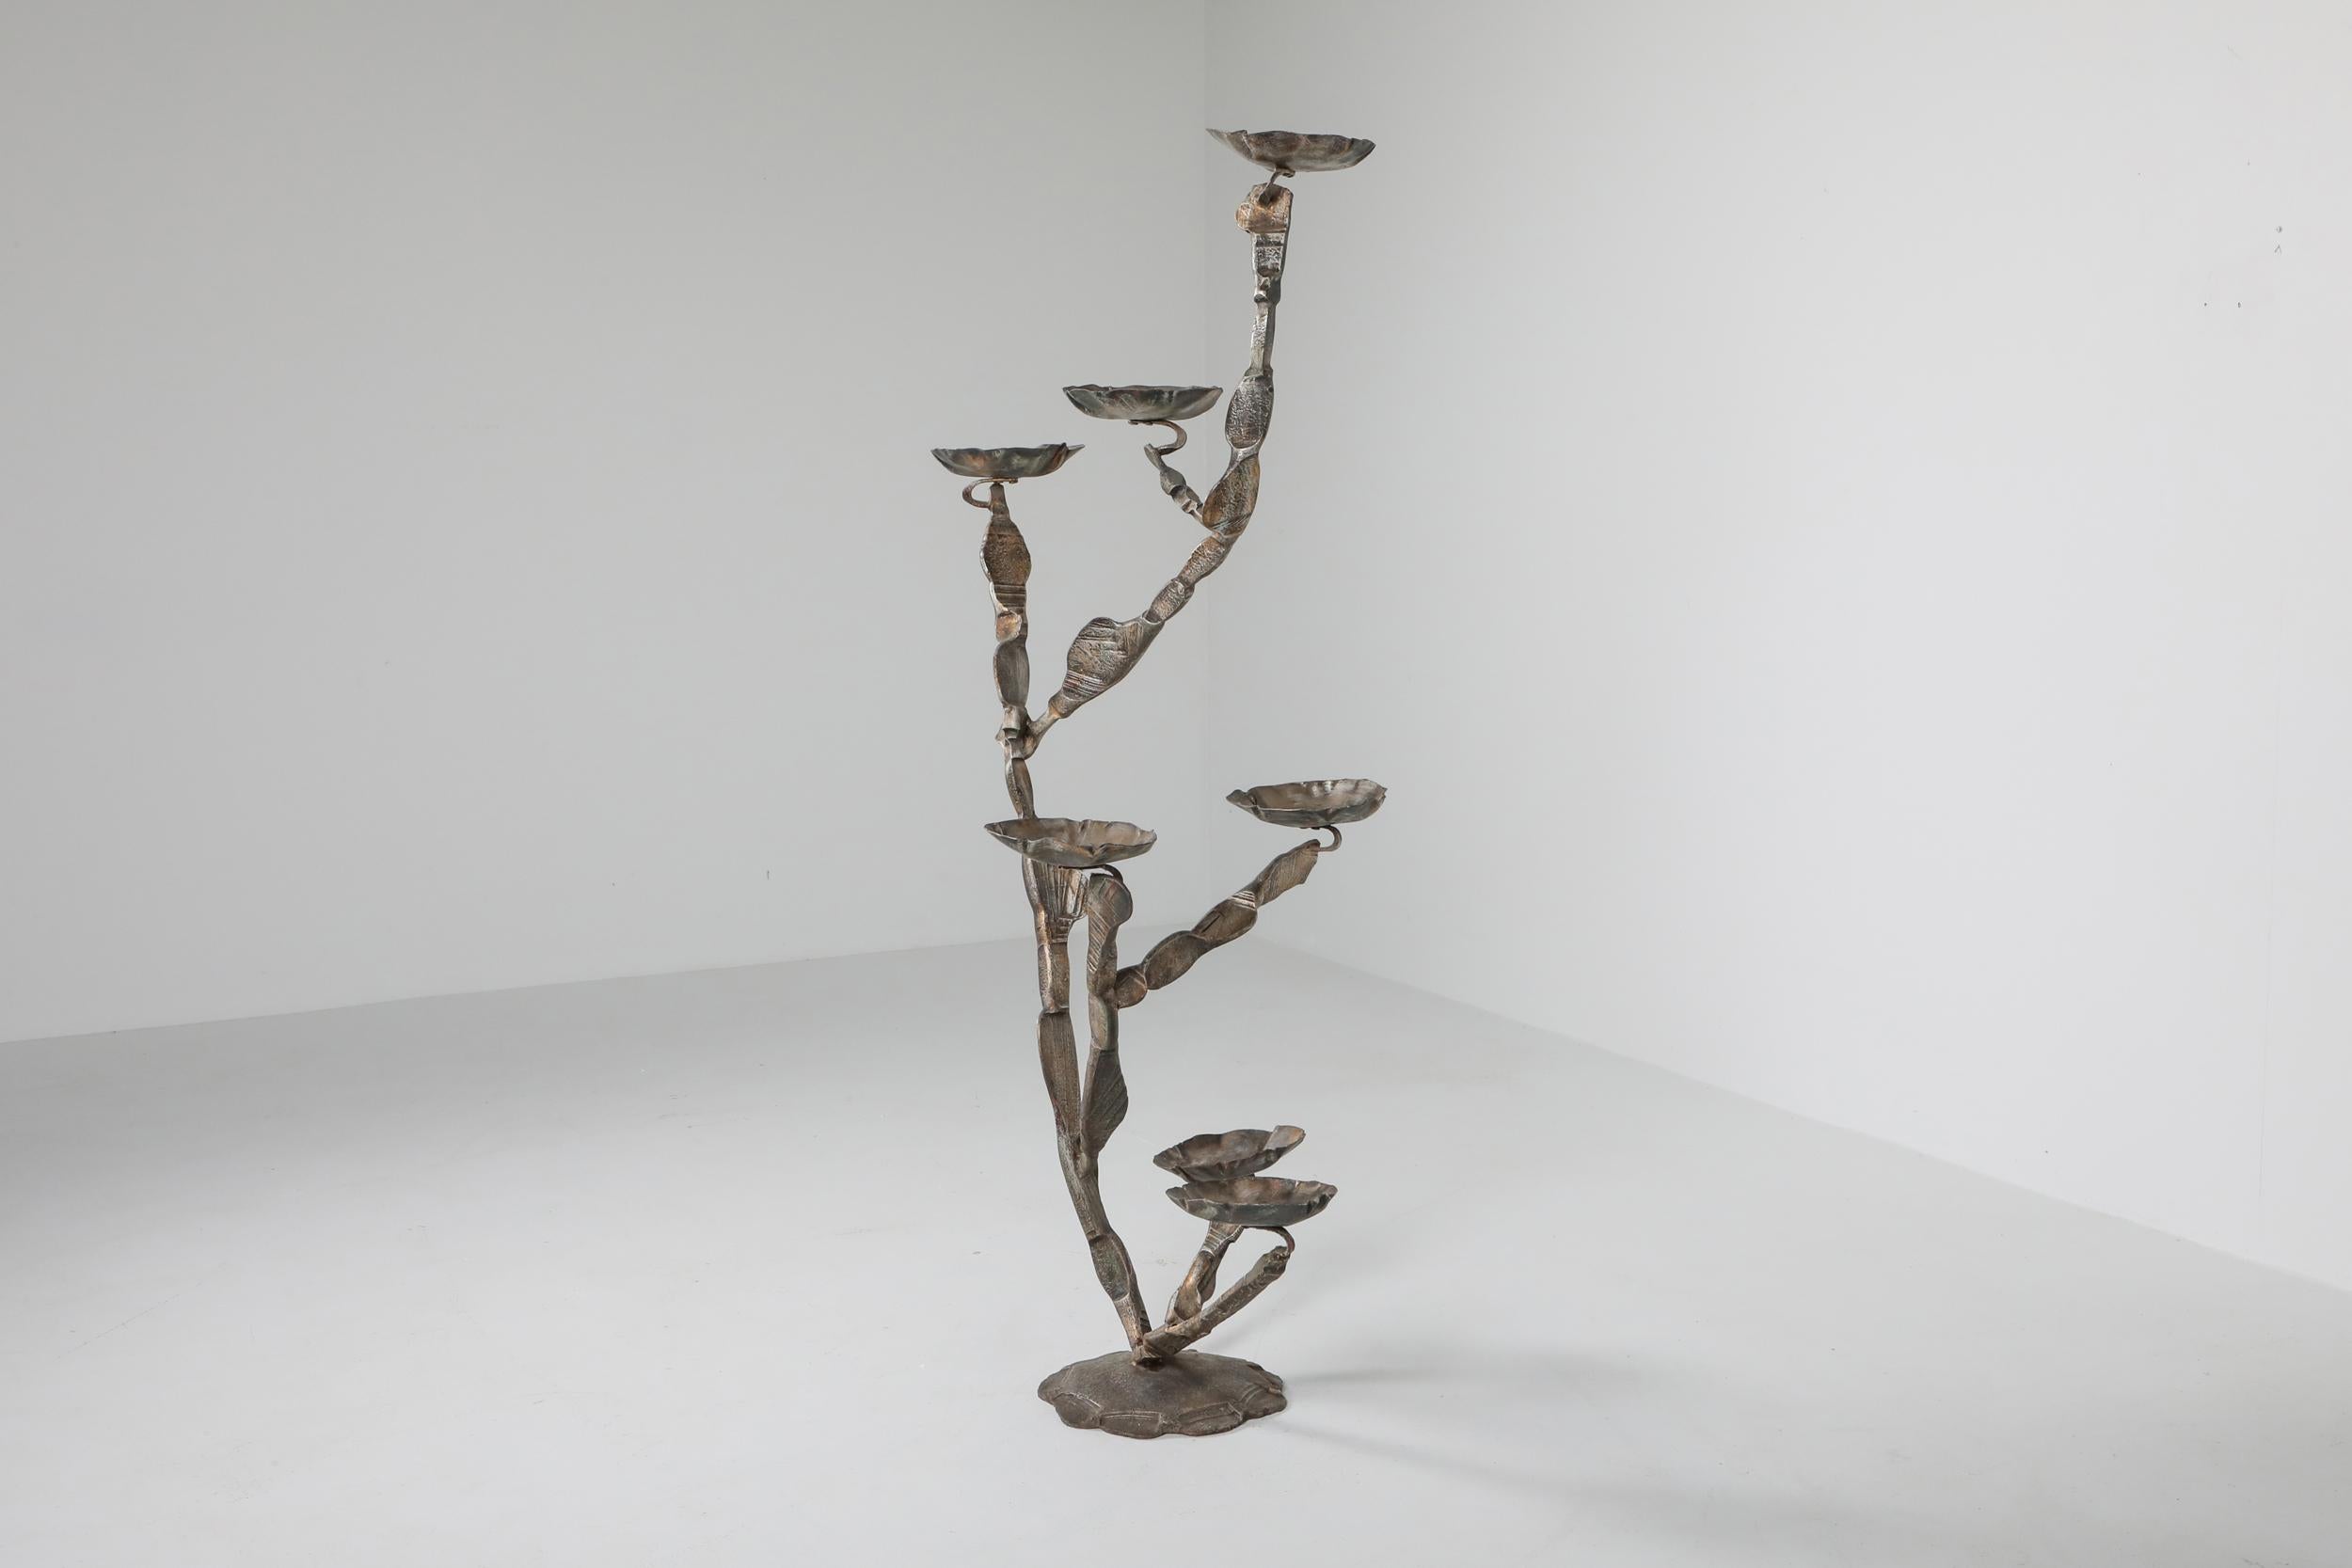 Sculpture, plant stand, candelabra, Salvino Marsura, Italy 1970s
Man-size work of art that is also a striking functional object. The piece was handmade of steel finished with powder pigments. 

Salvino Marsura is an Italian artist born in Treviso